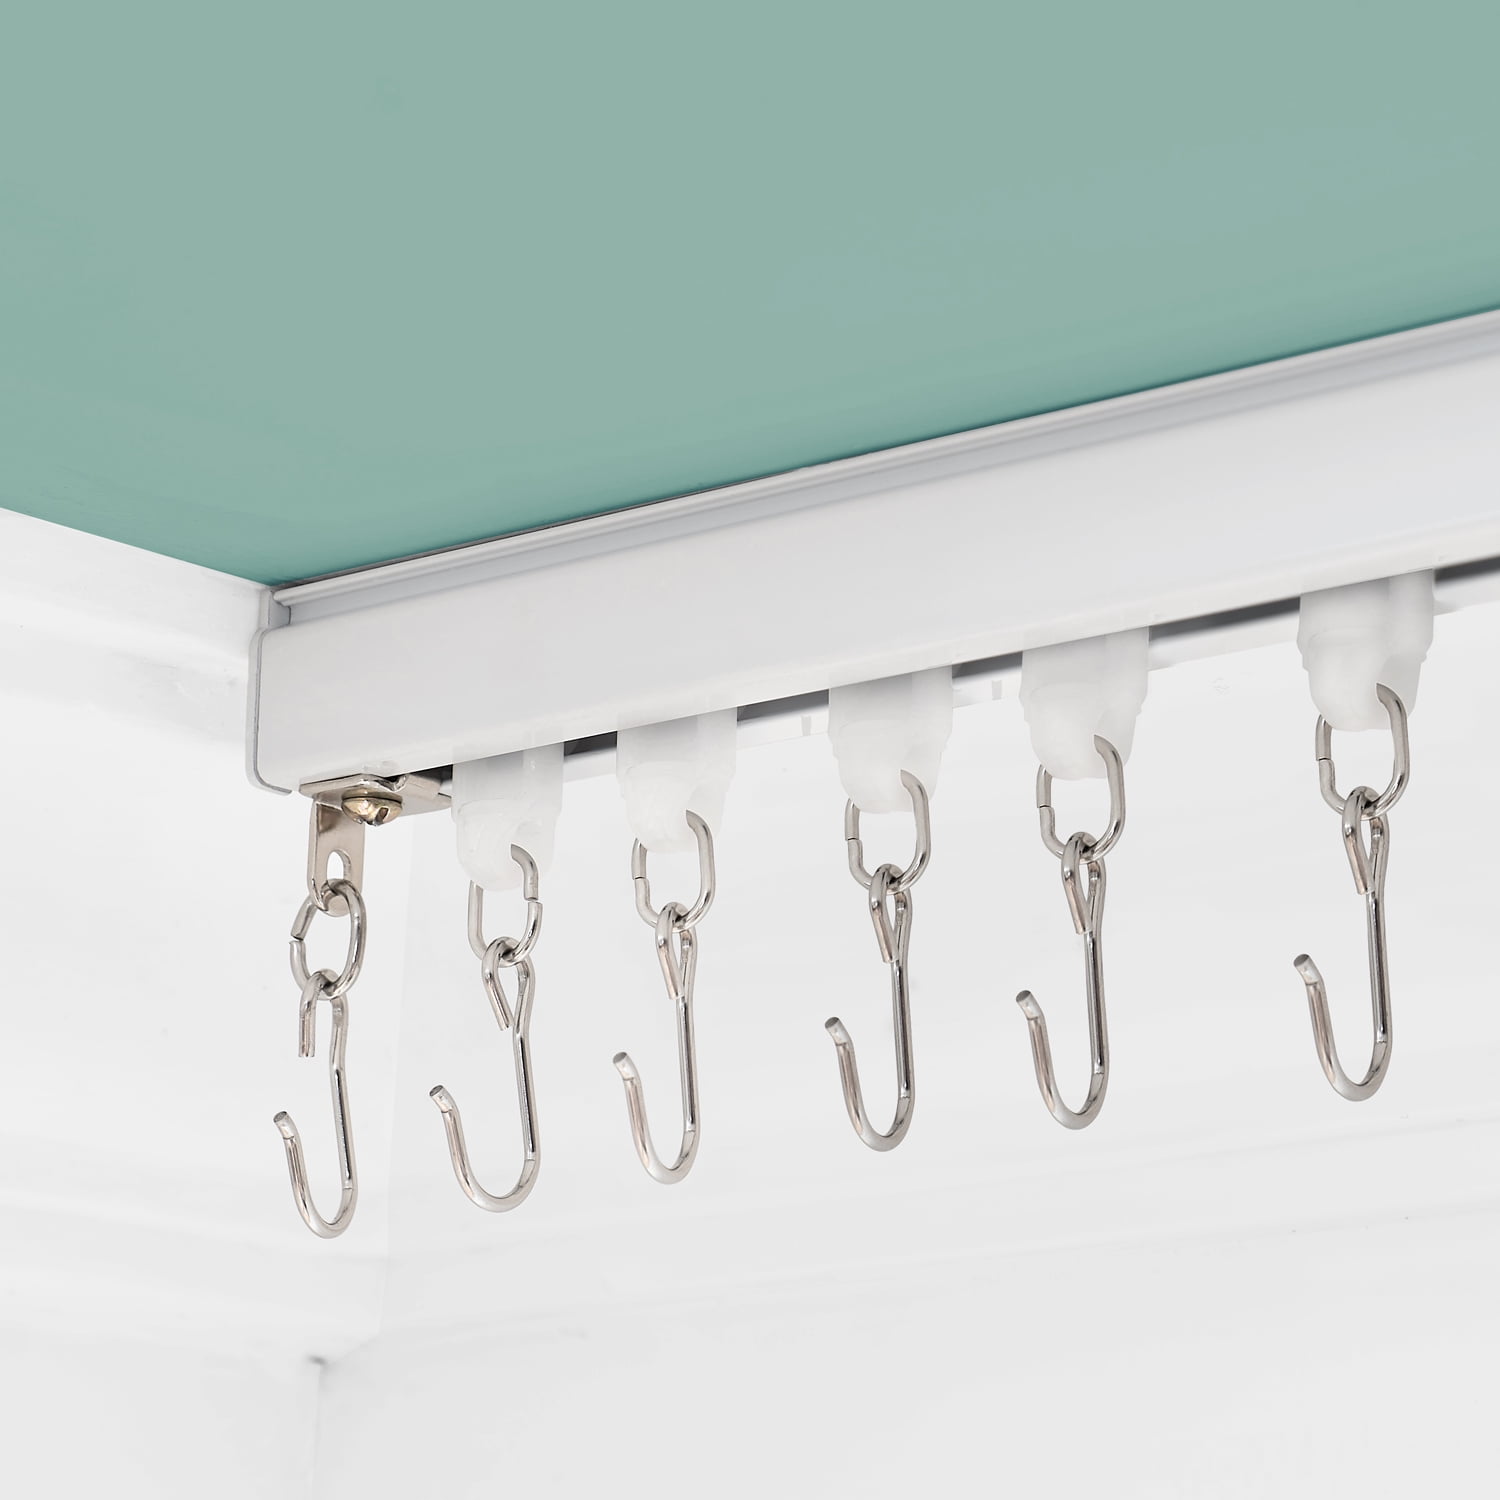 Chadmade Ceiling Or Wall Mount Track